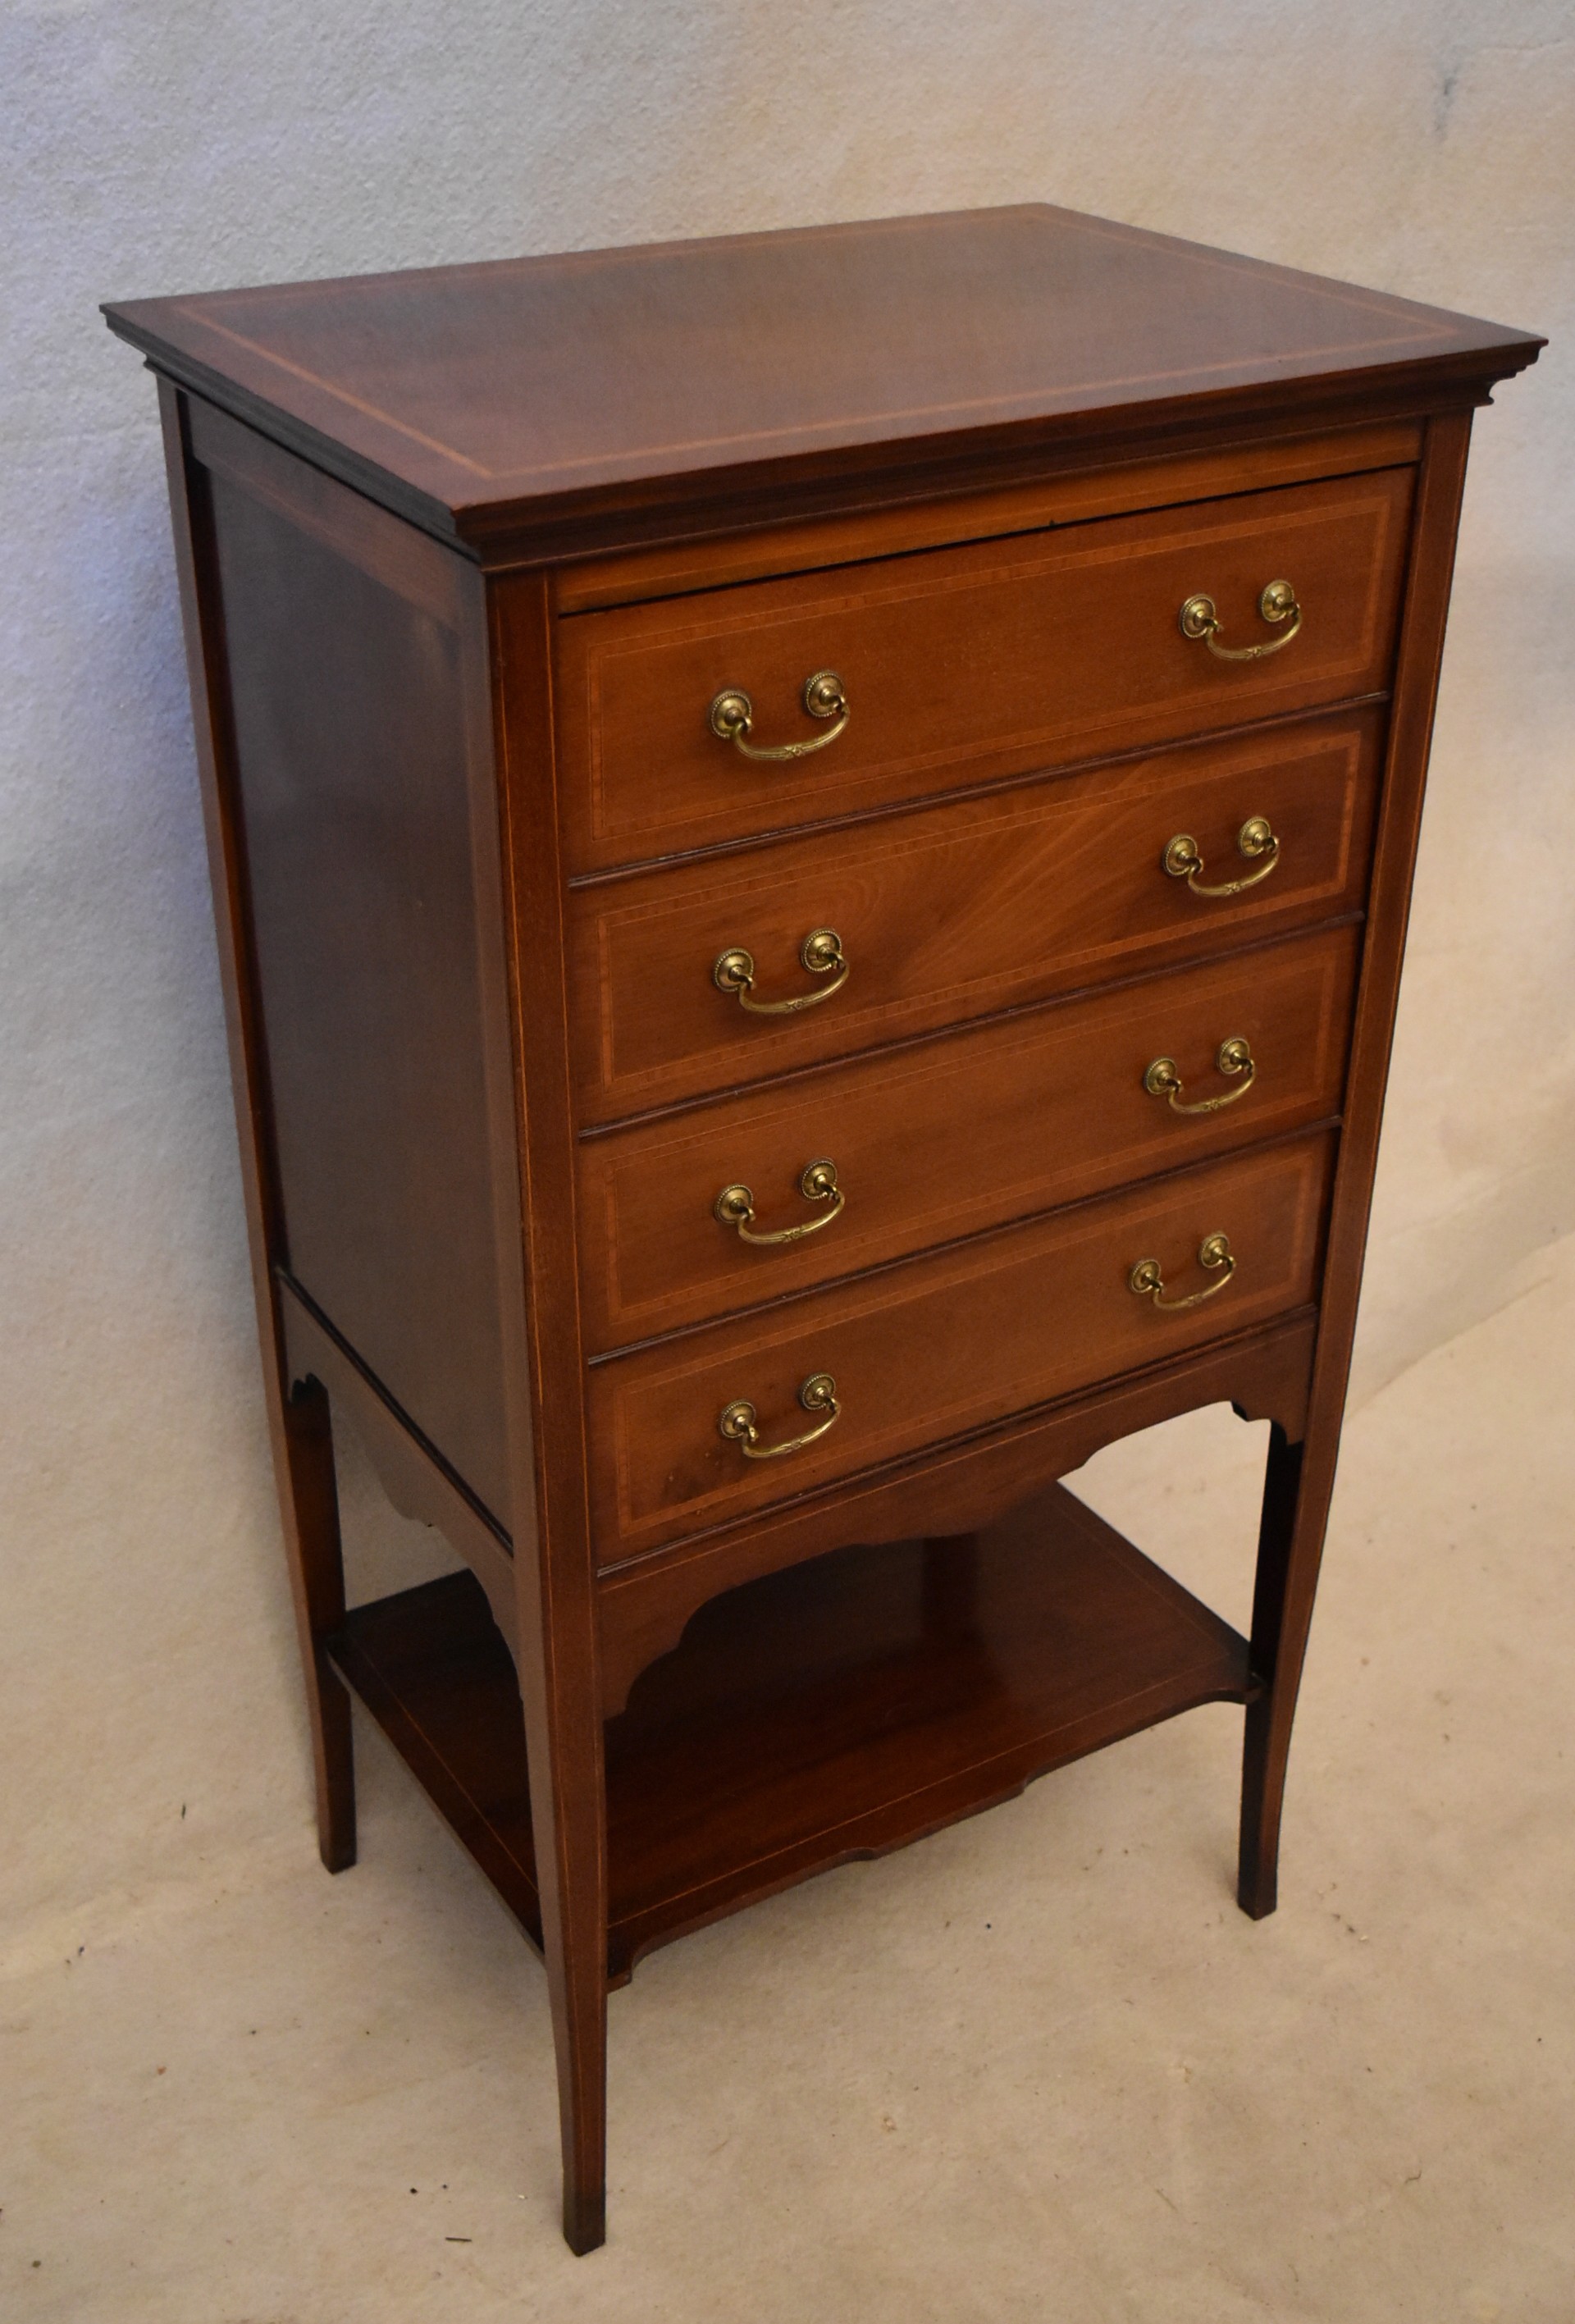 An Edwardian mahogany and inlaid music chest, the four long drawers with fall fronts over an